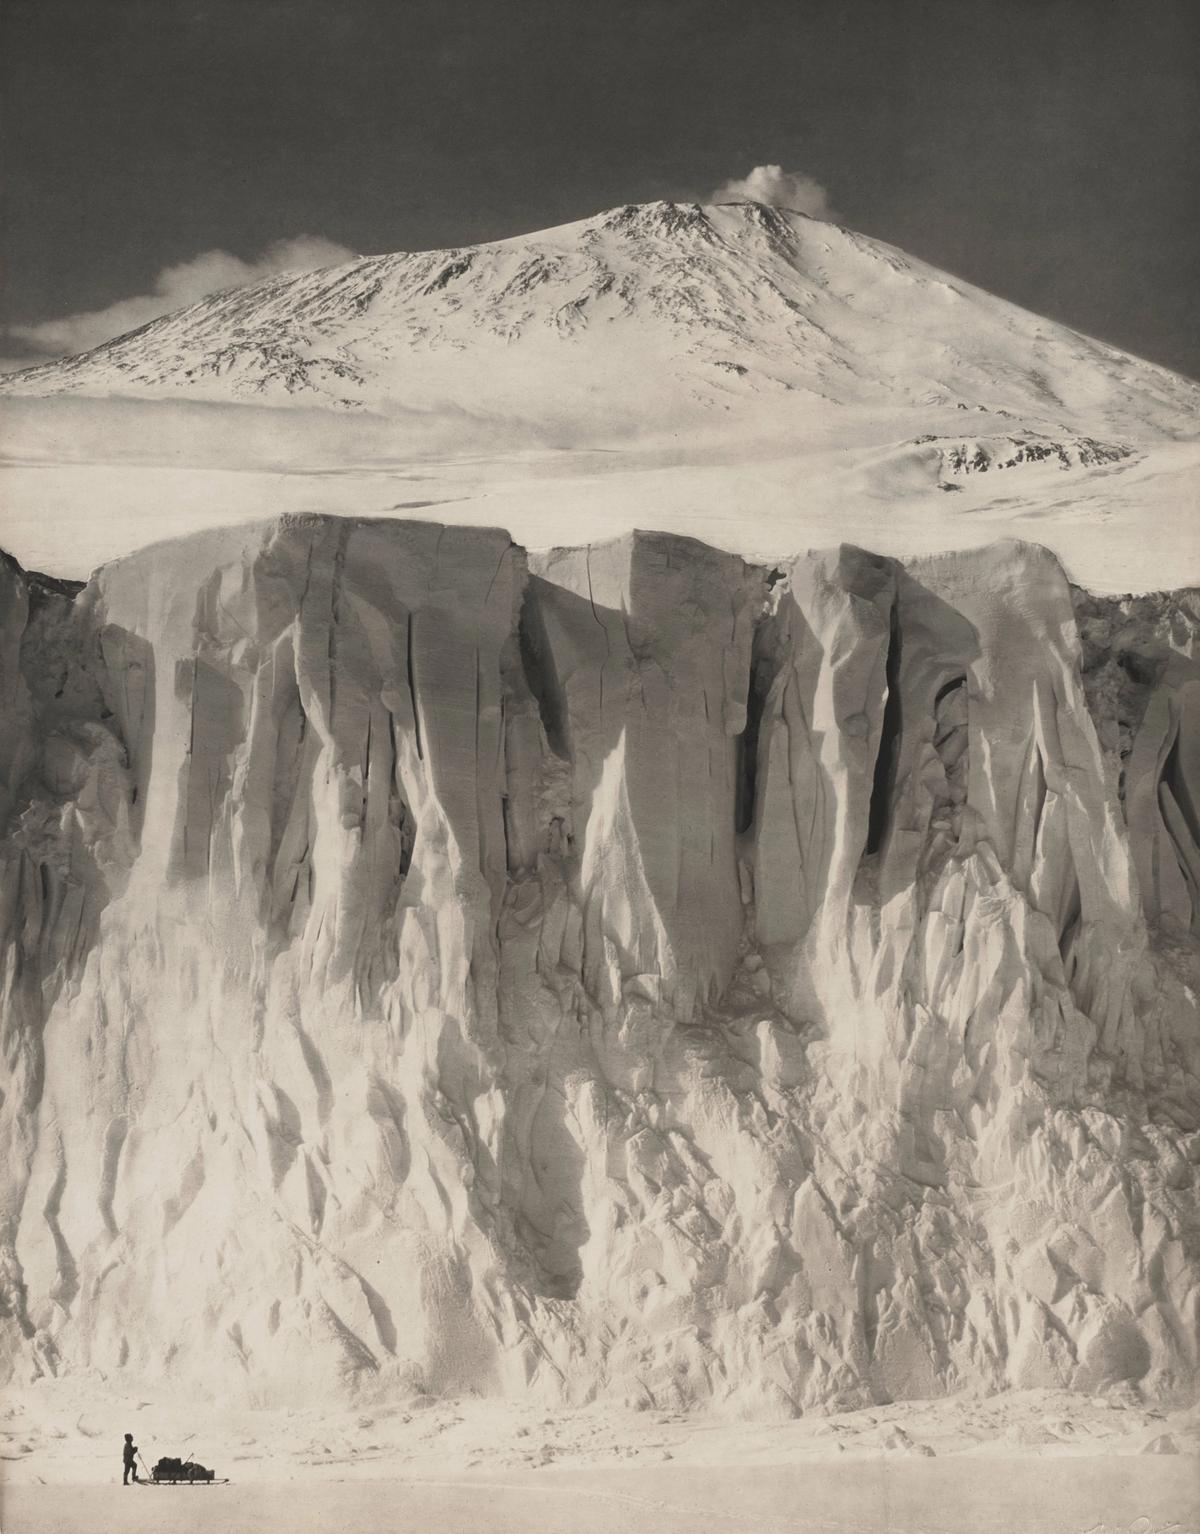 Herbert George Ponting, The Ramparts of Mount Erebus (1911) The Gayle Greenhill Collection. Gift of Robert F. Greenhill